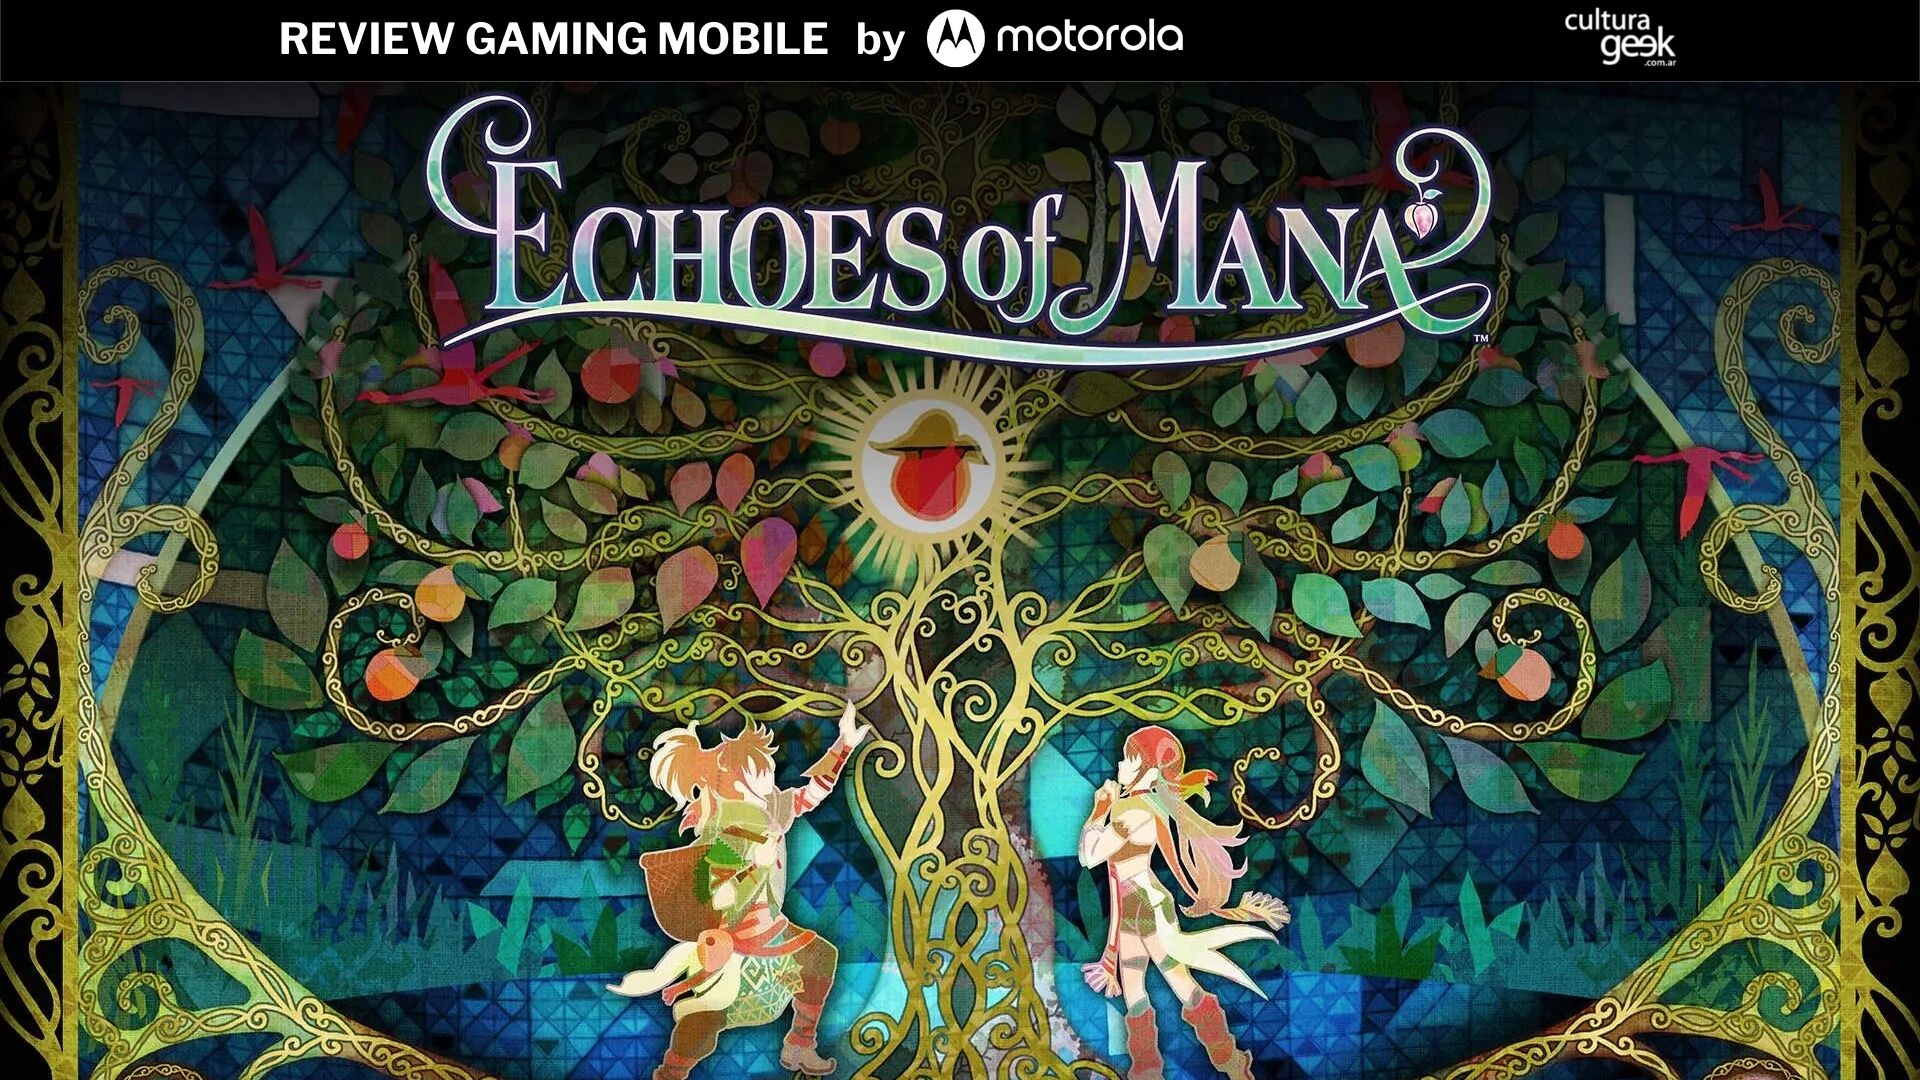 Echoes of mana